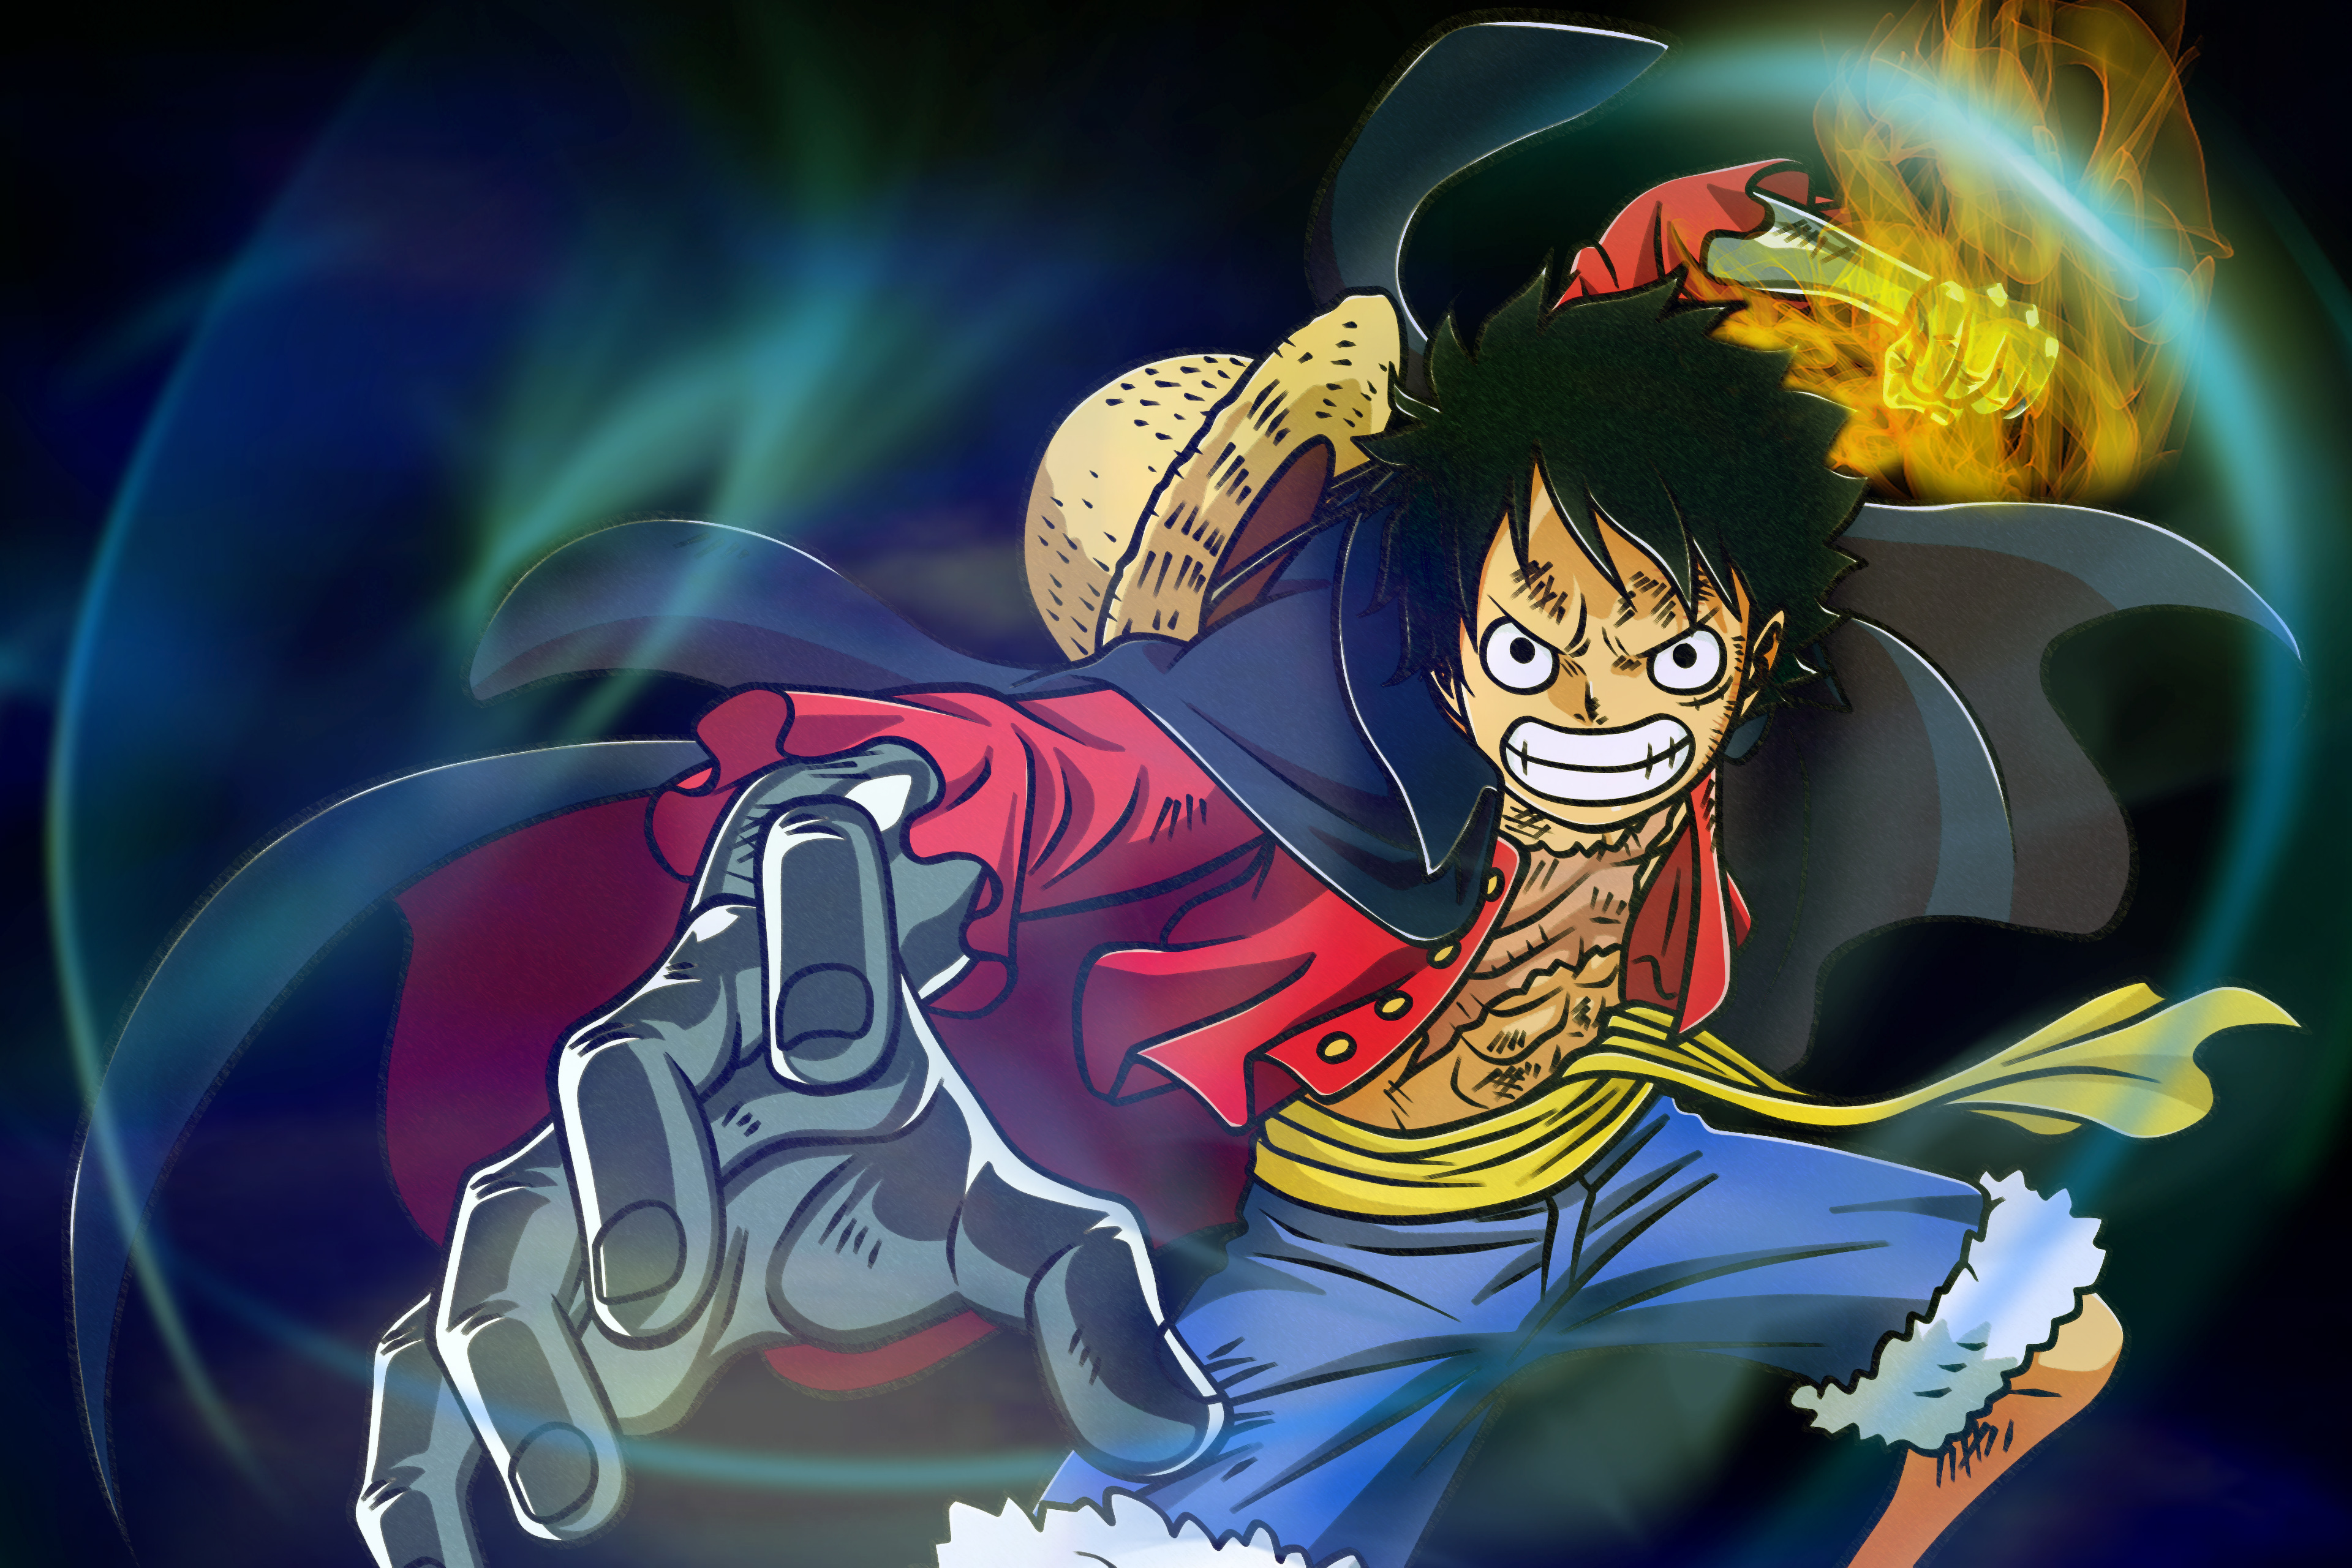 monkey d luffy iPhone Wallpapers Free Download